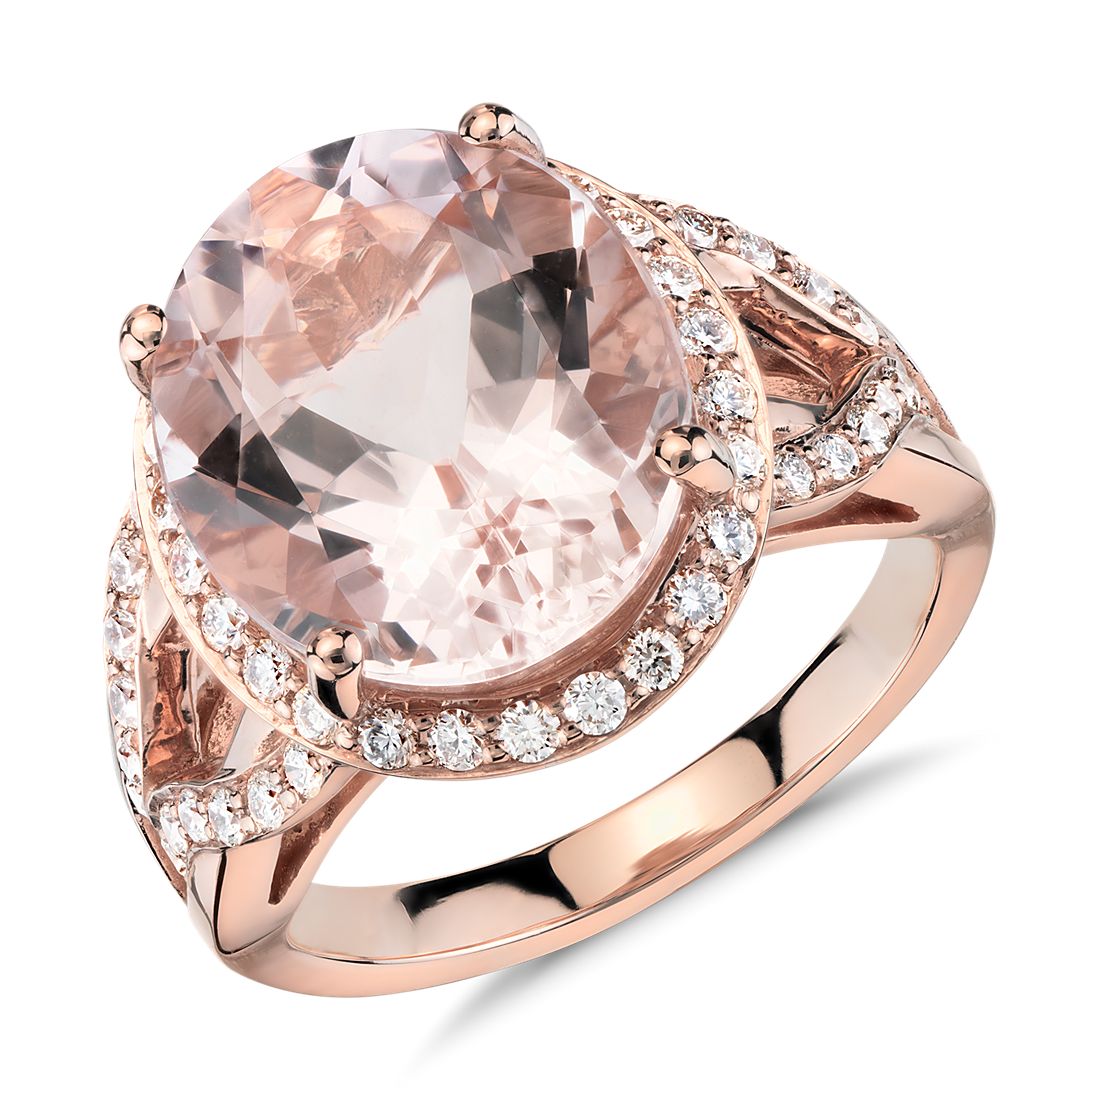 Morganite and Diamond Halo Ring in 18k Rose Gold (13x11mm) | Blue Nile